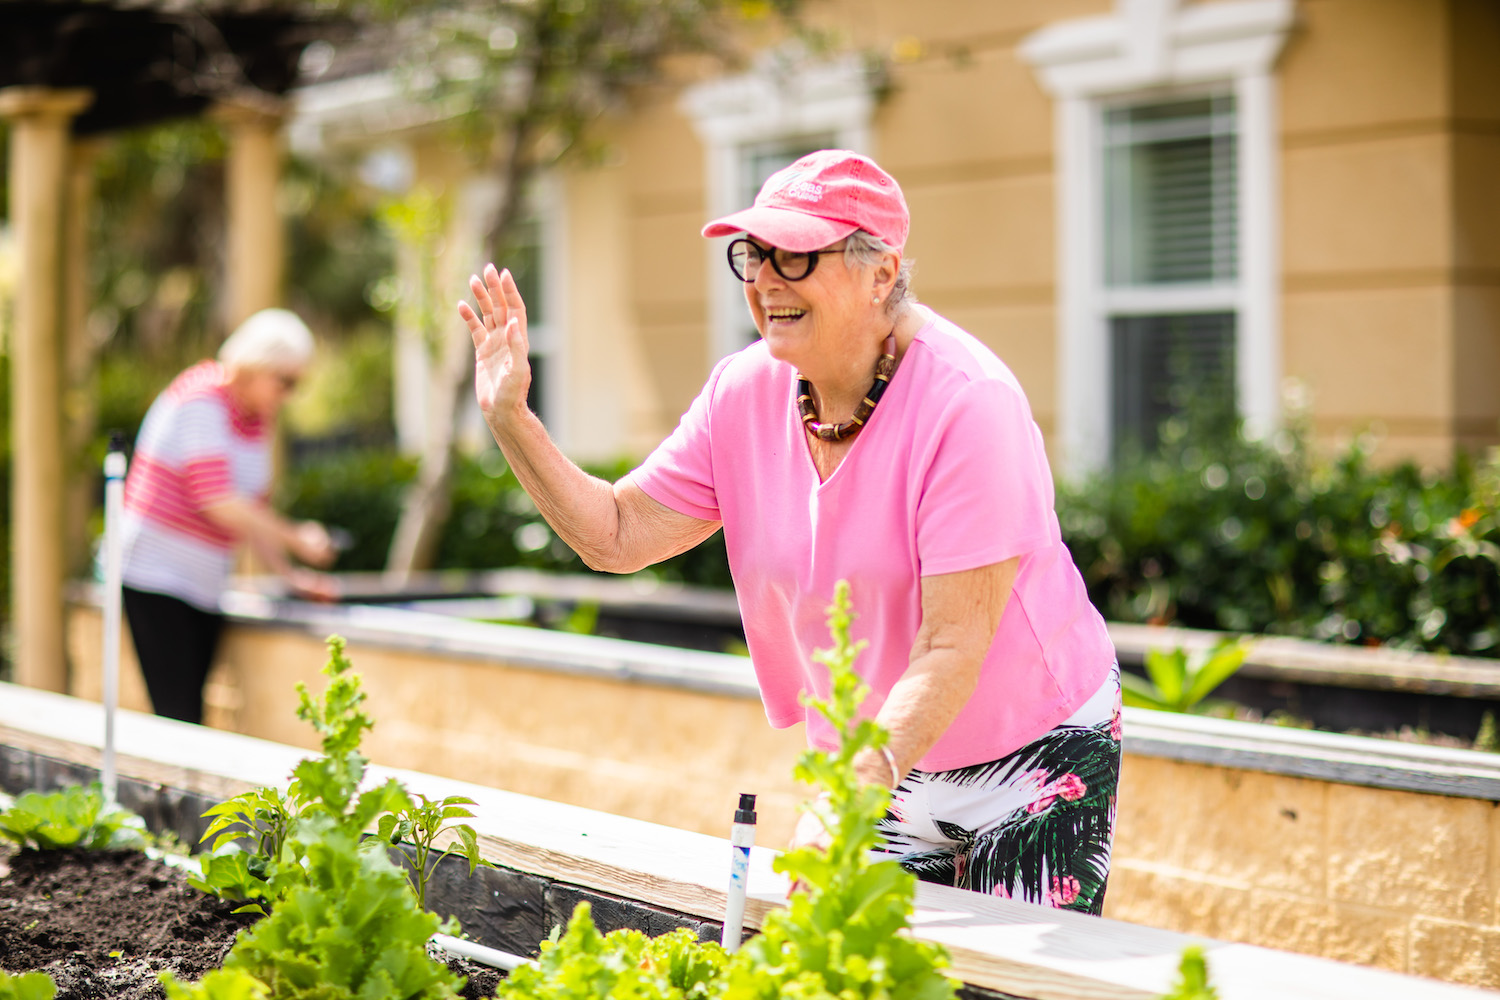 Residents gardening together